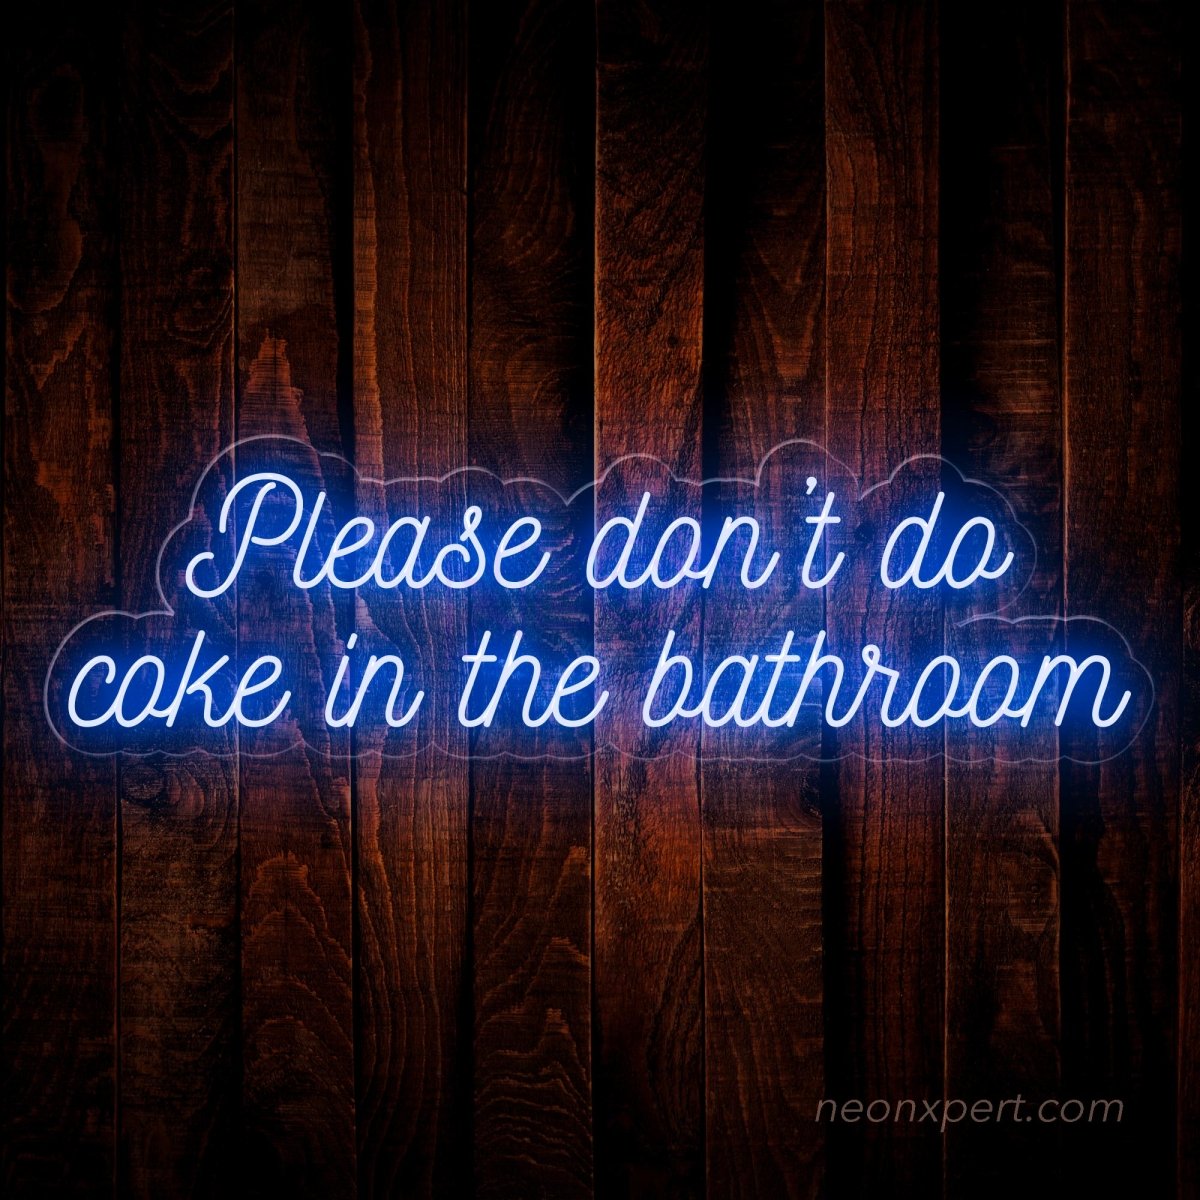 Please Don't Do Coke in the Bathroom Neon Sign - Quirky Decor | LED Humor - NeonXpert